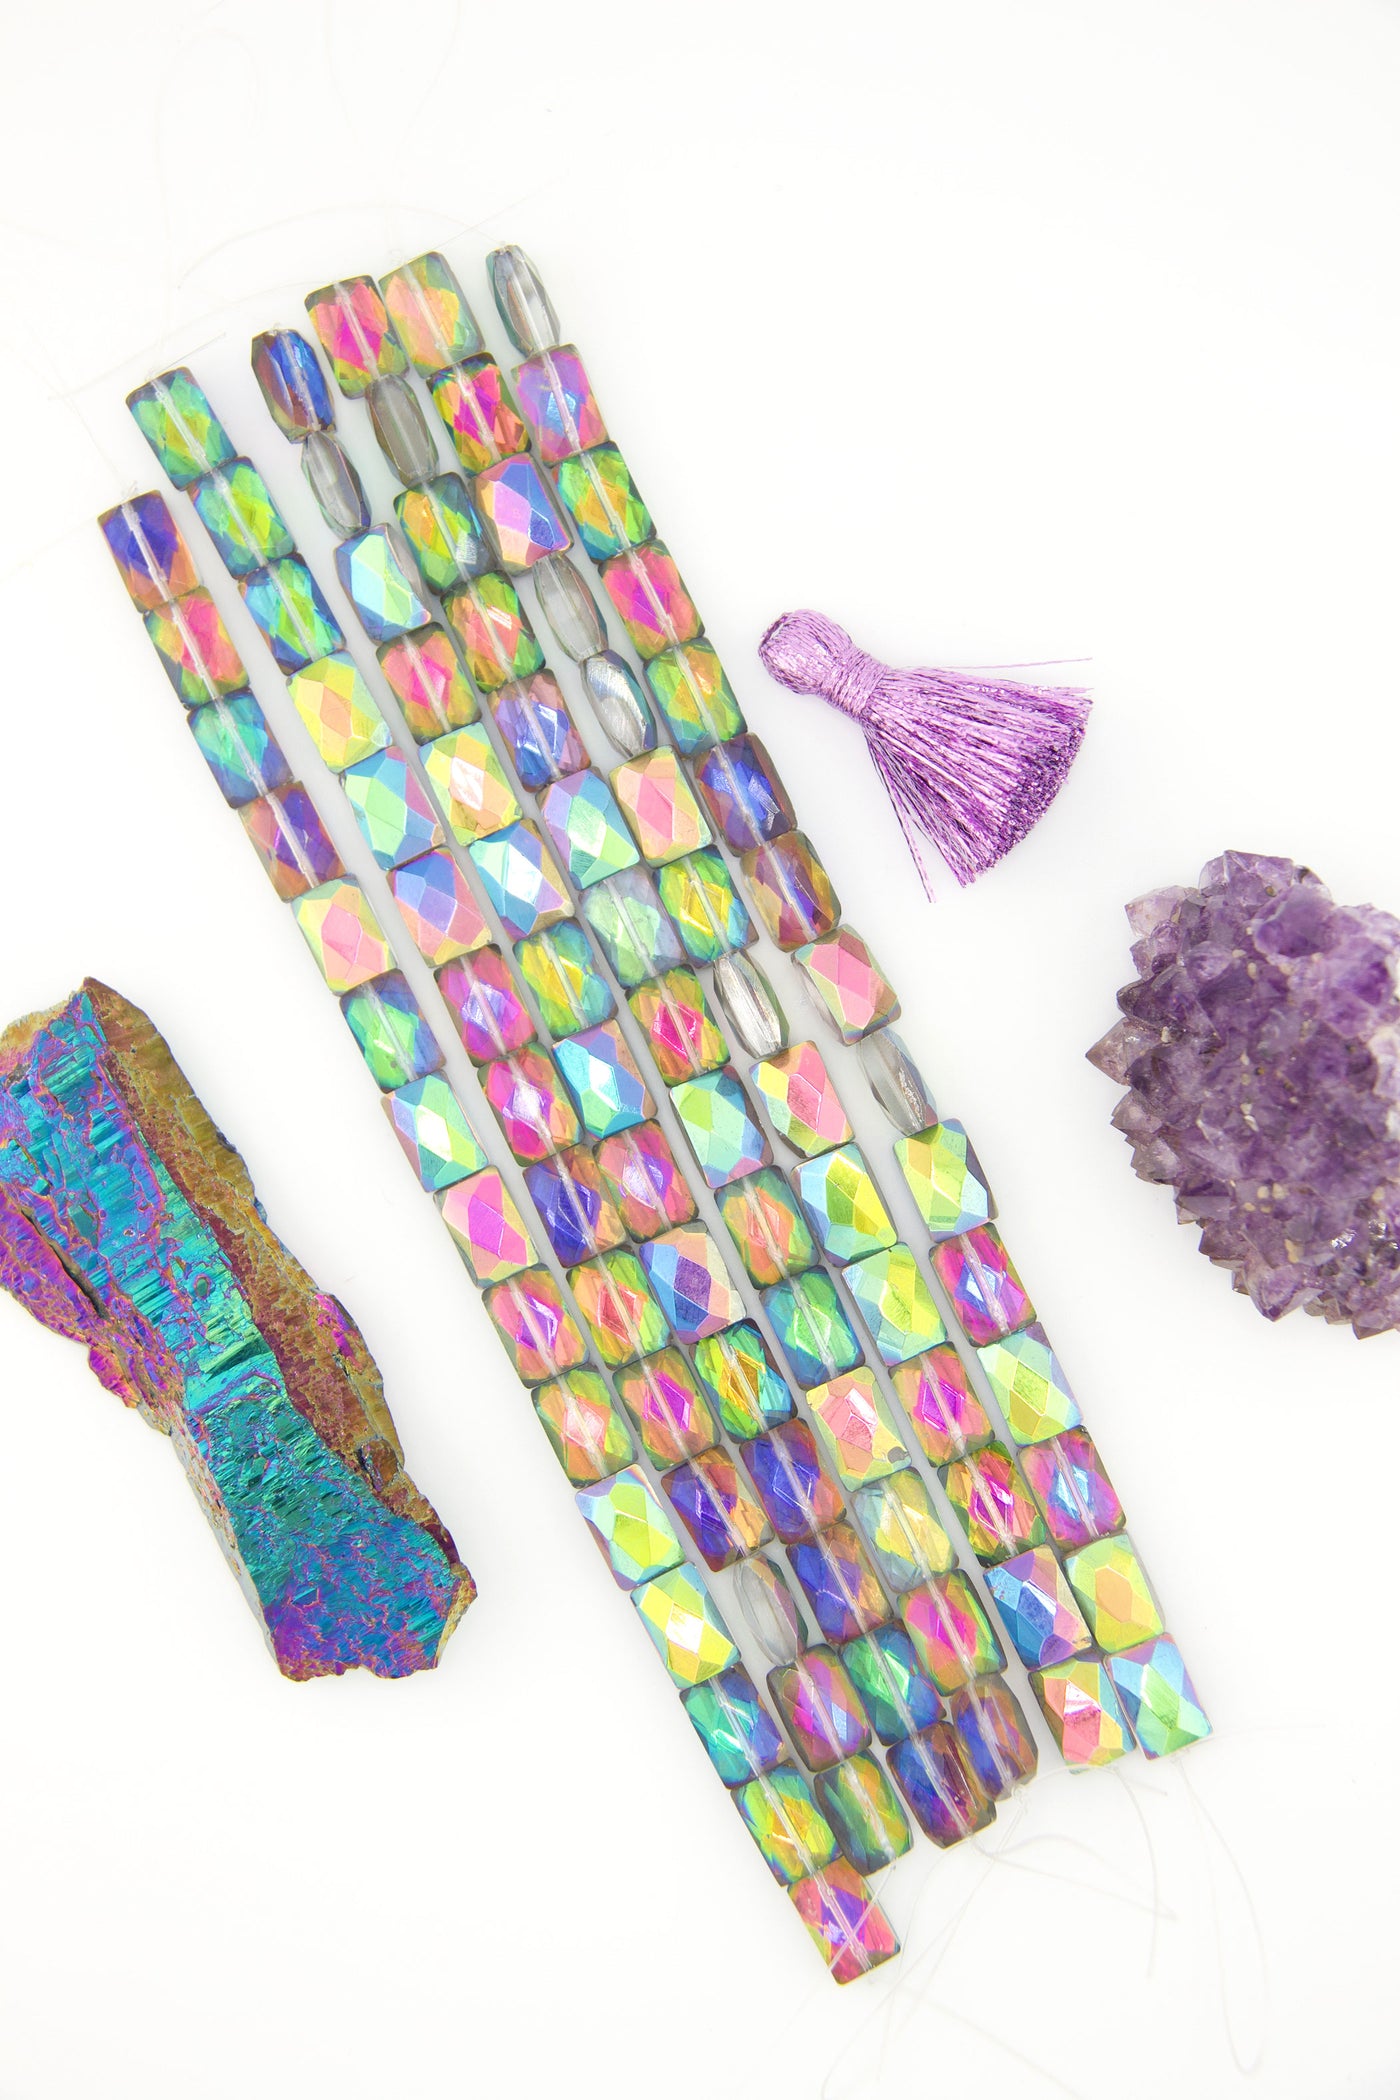 Aurora Borealis Faceted Rectangle Glass Beads, AB Finish, 8x12mm